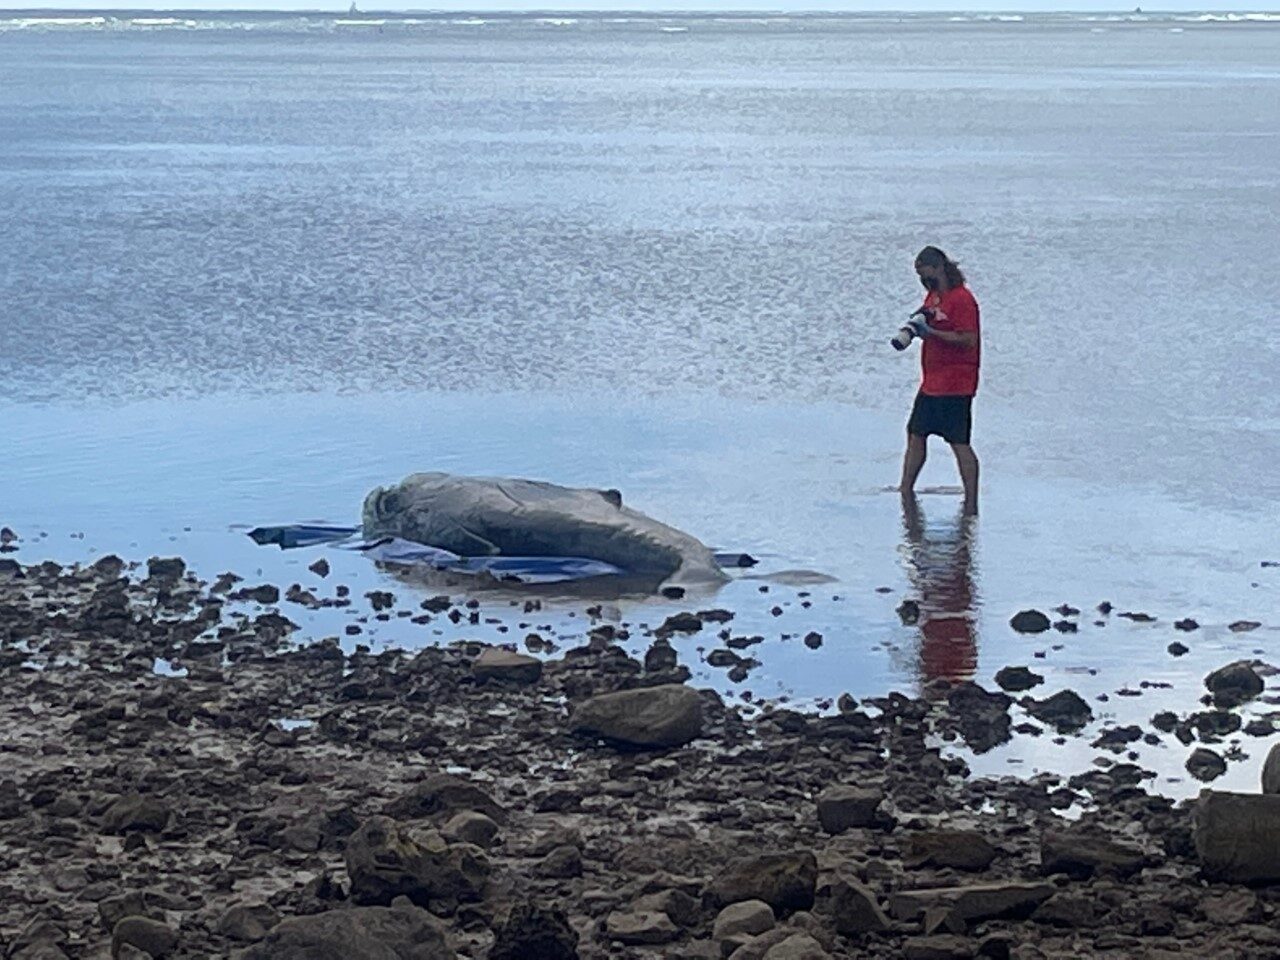 Dead baby humpback whale found in Hawaii Kai